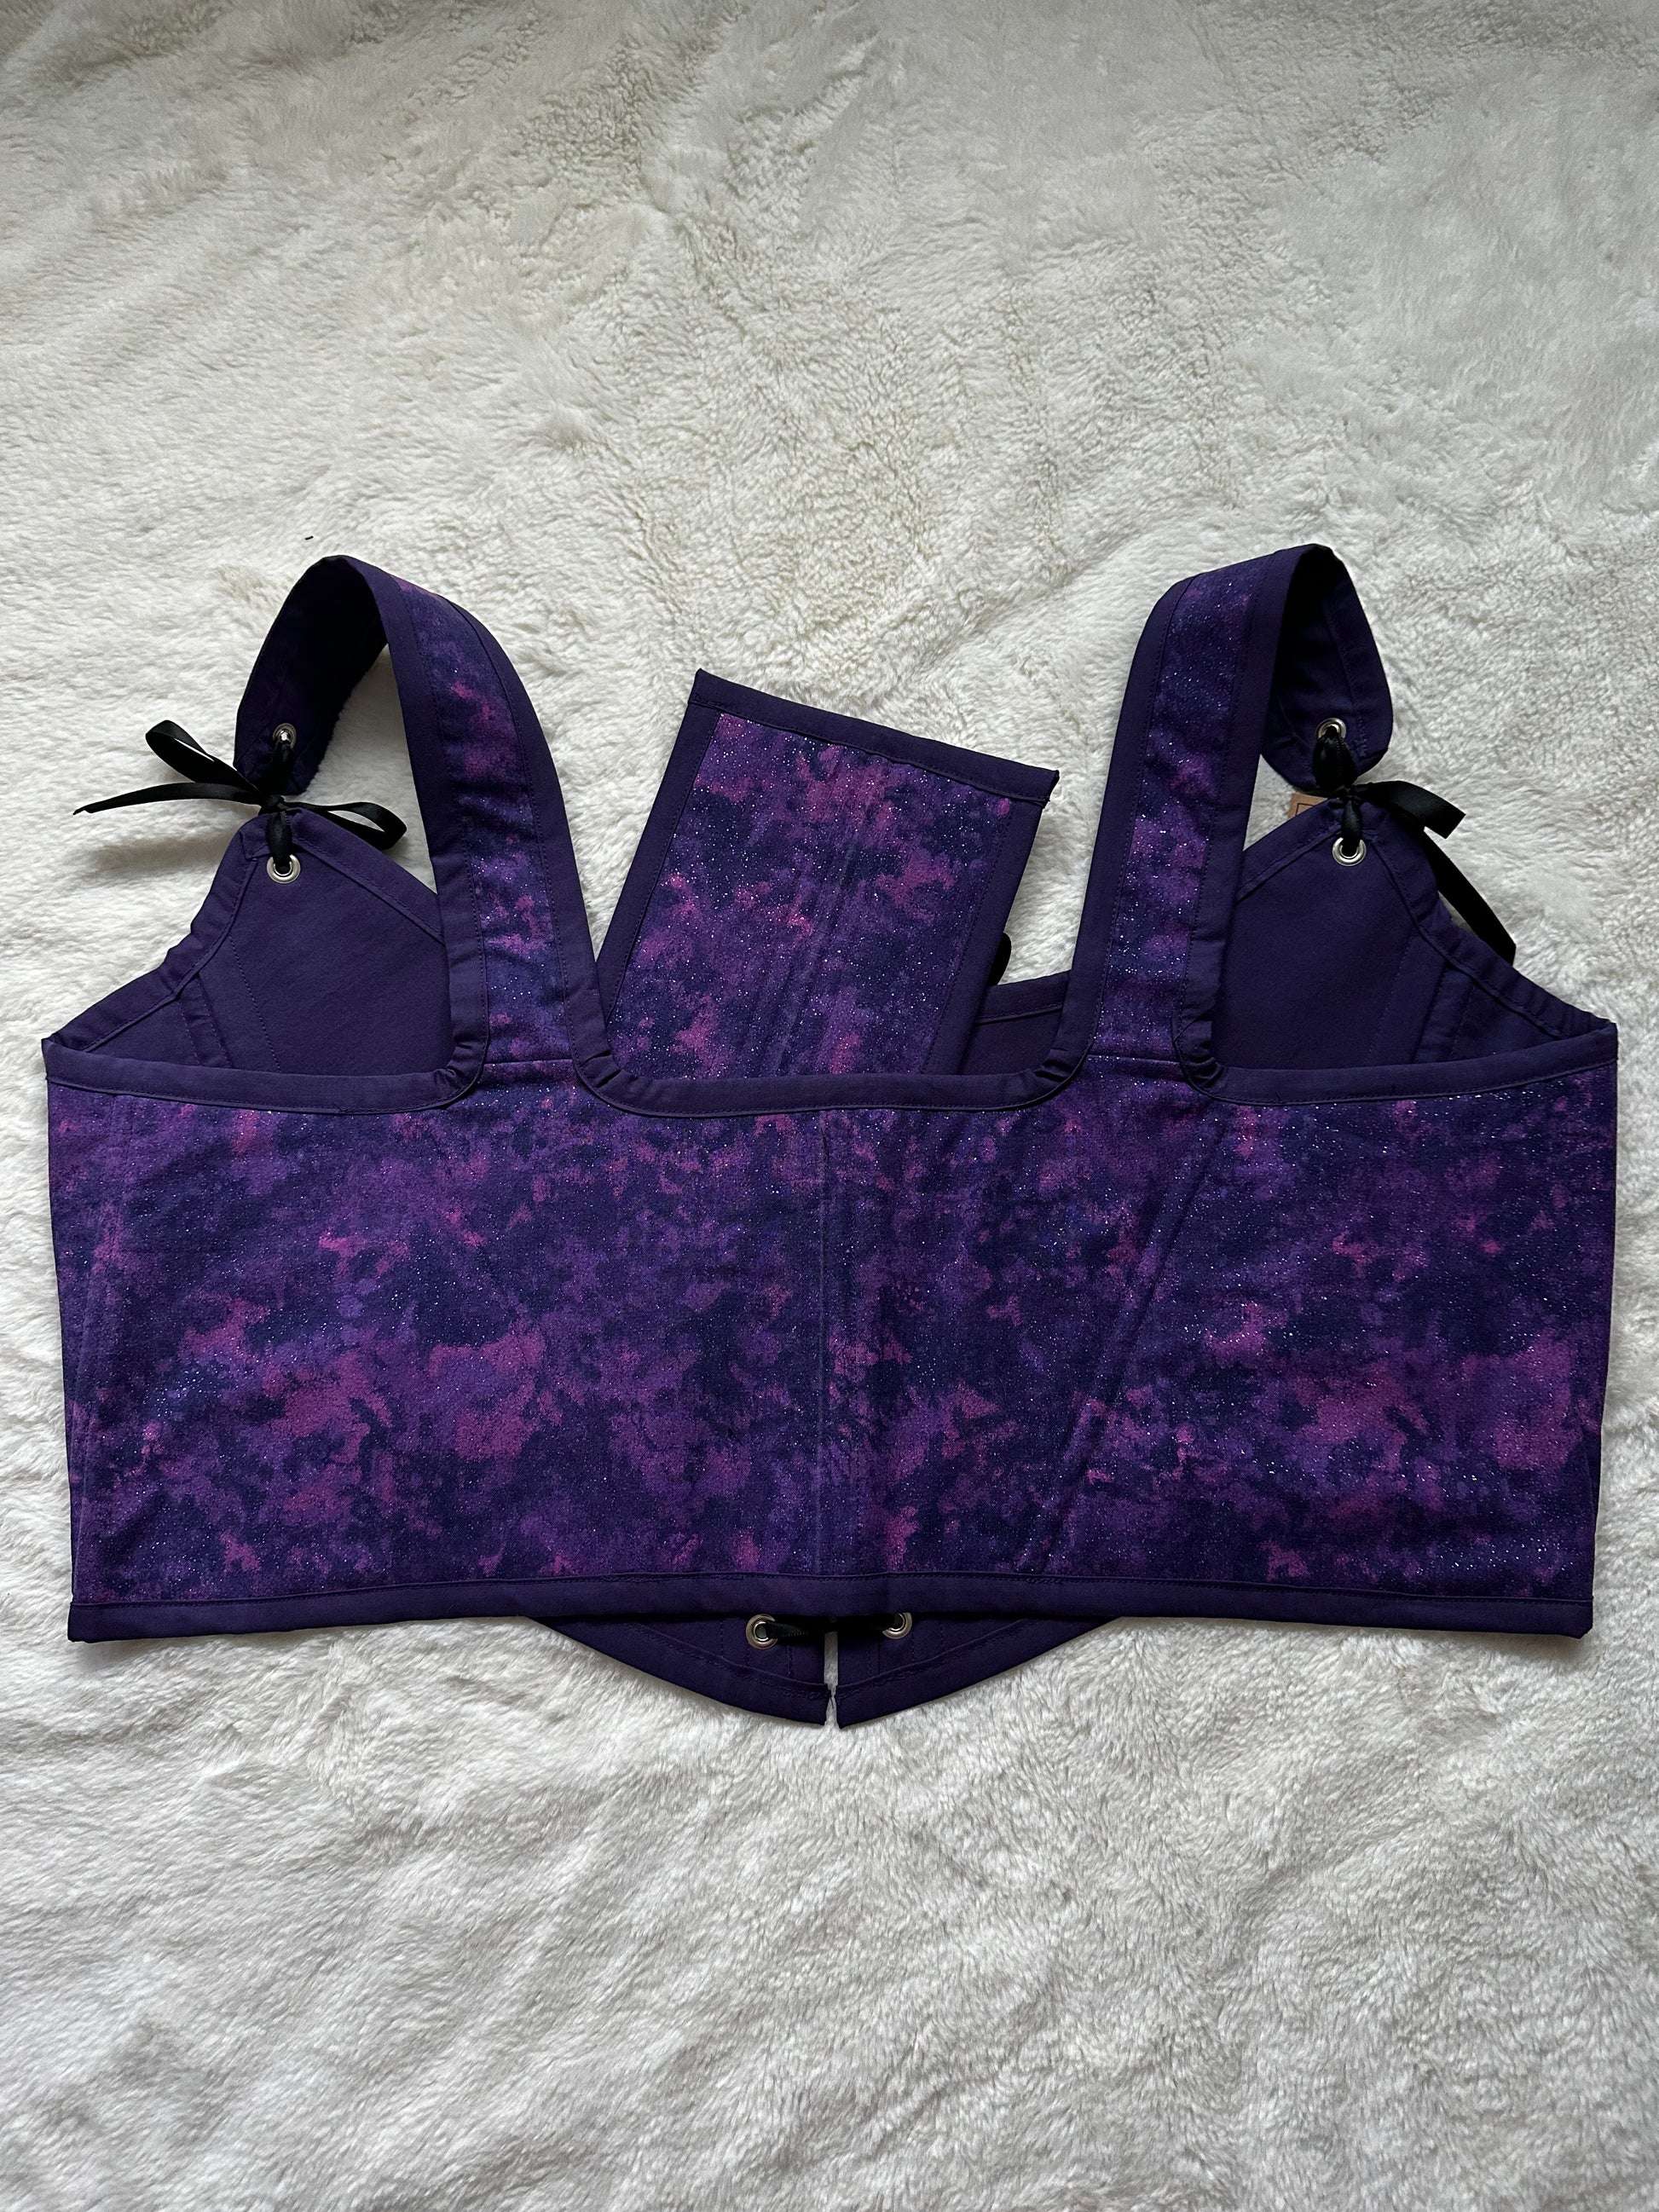 Back view of renaissance bodice in purple and pink celestial print. Purple bias border around edges. Black ribbon connects the straps to the bodice. Bodice is laying on white fluffy blanket.